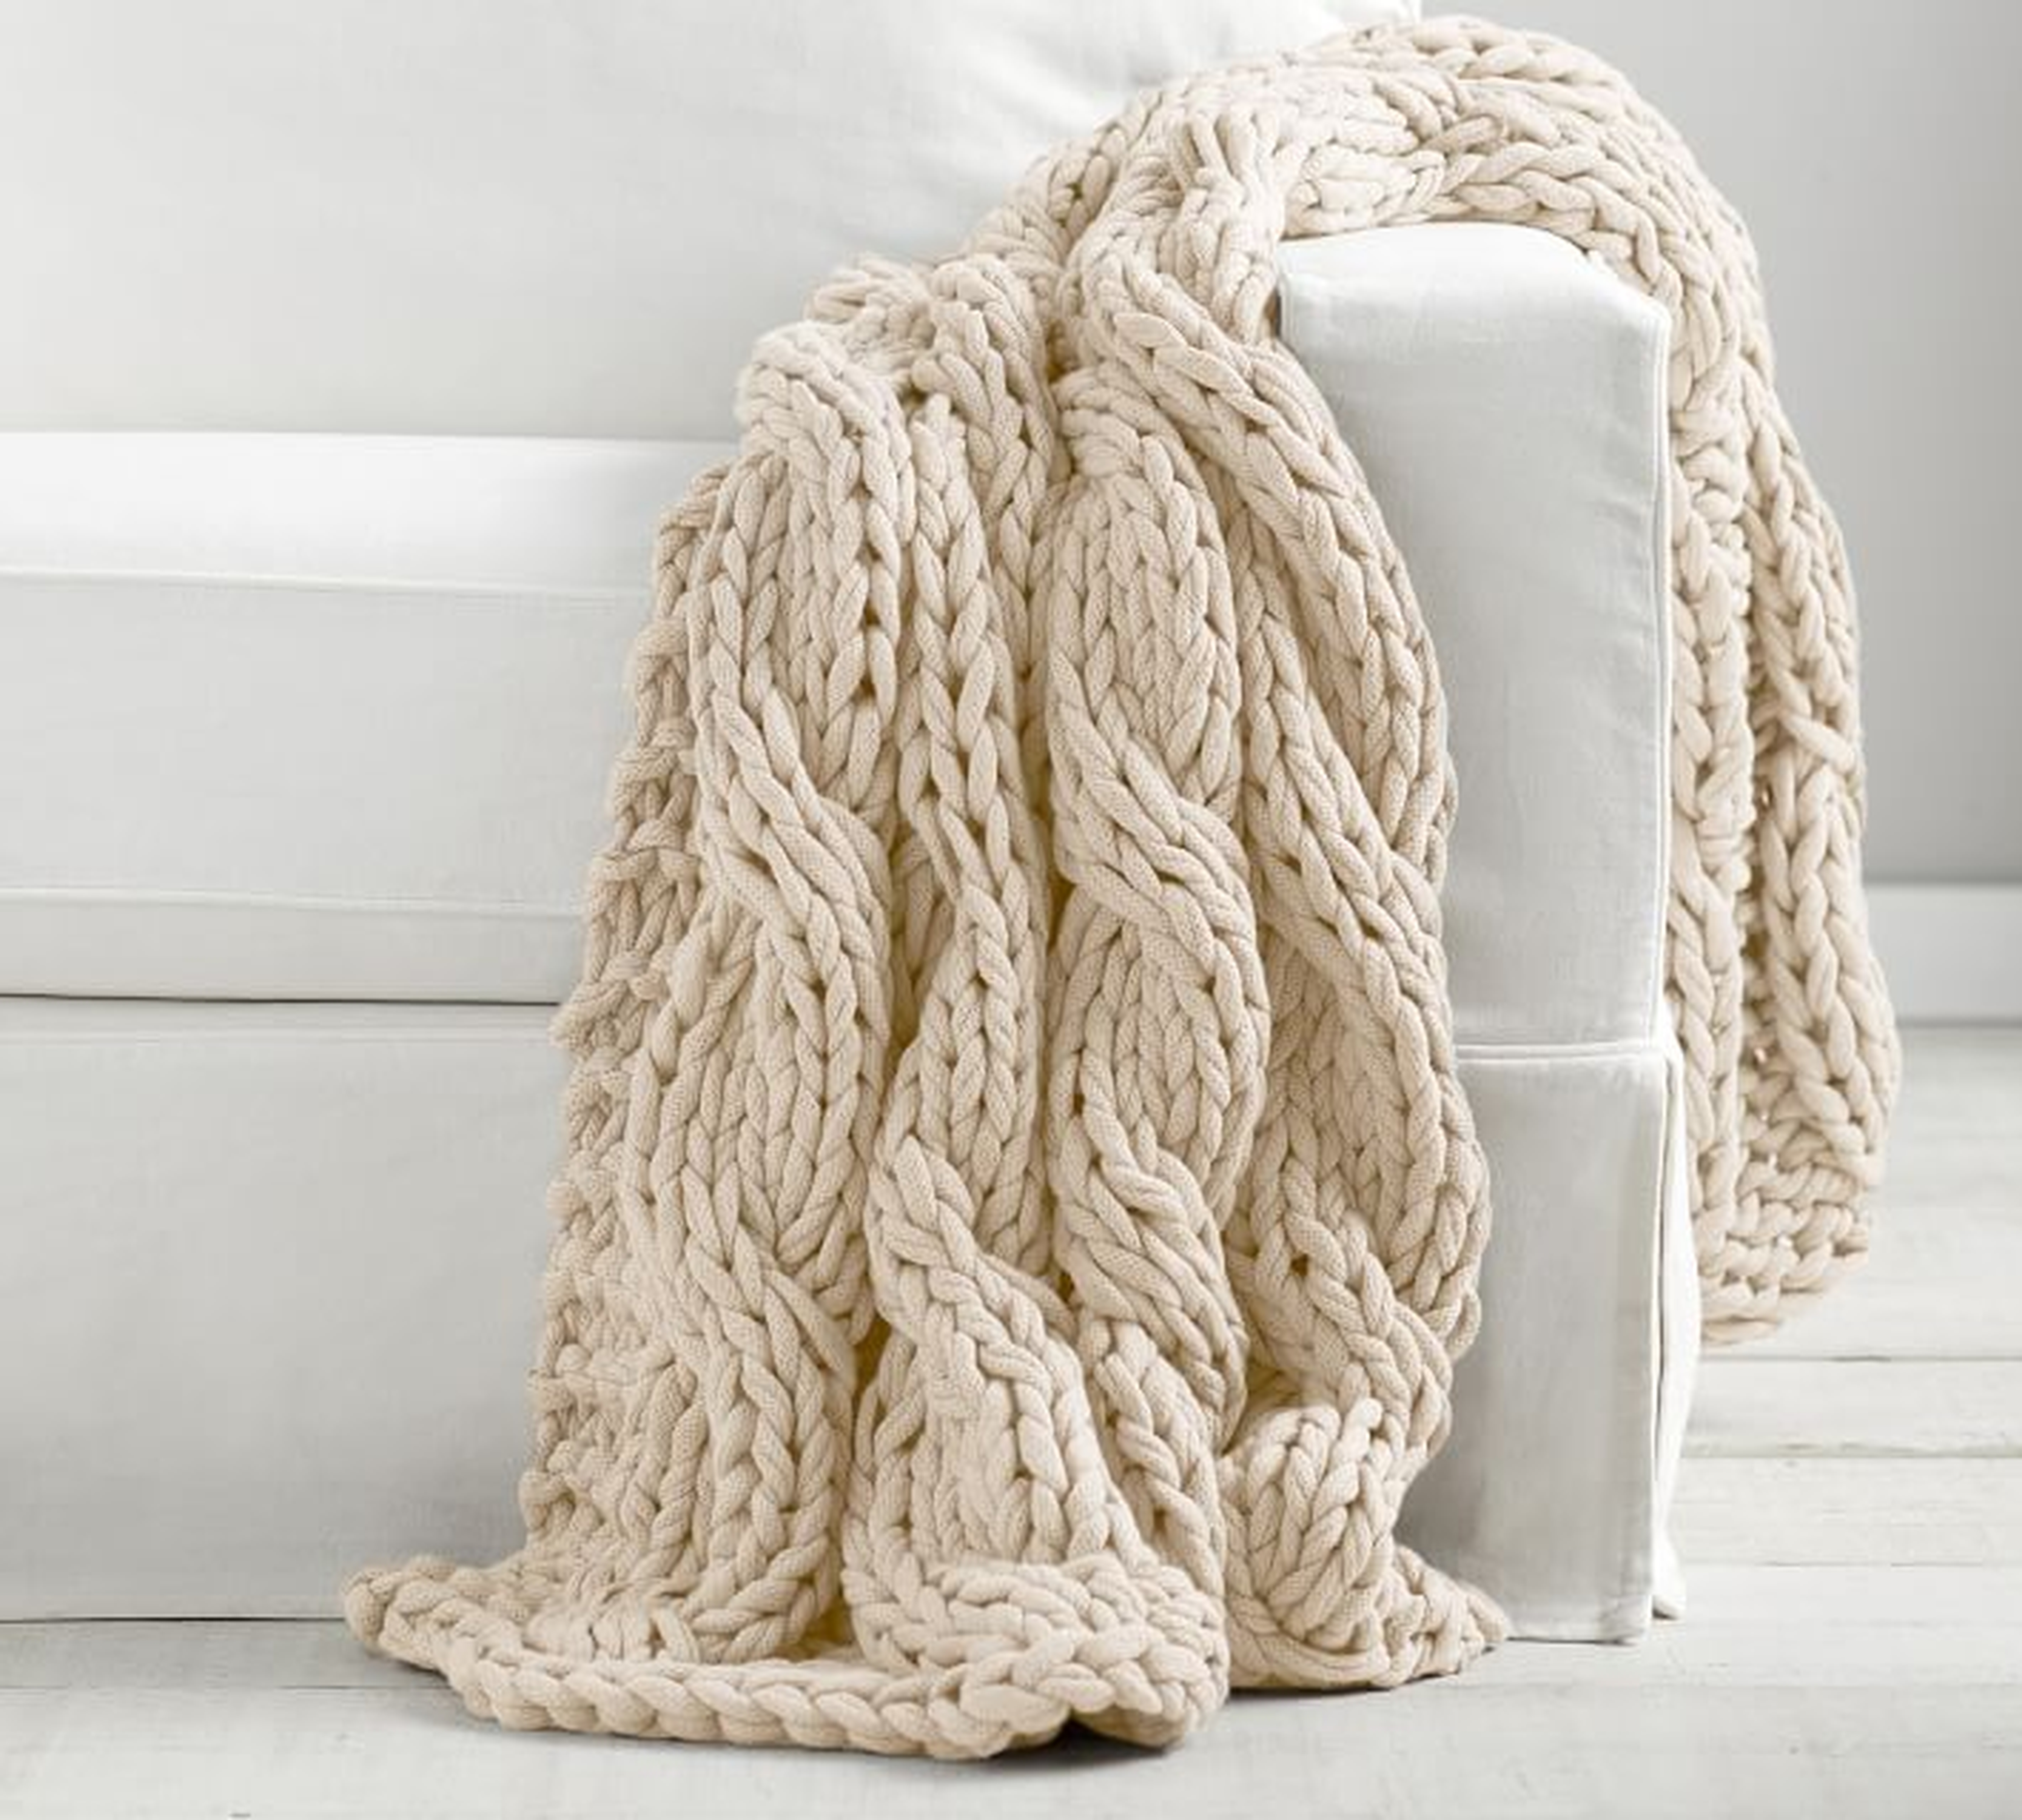 Colossal Handknit Throw Blanket, 44 x 56", Ivory - Pottery Barn